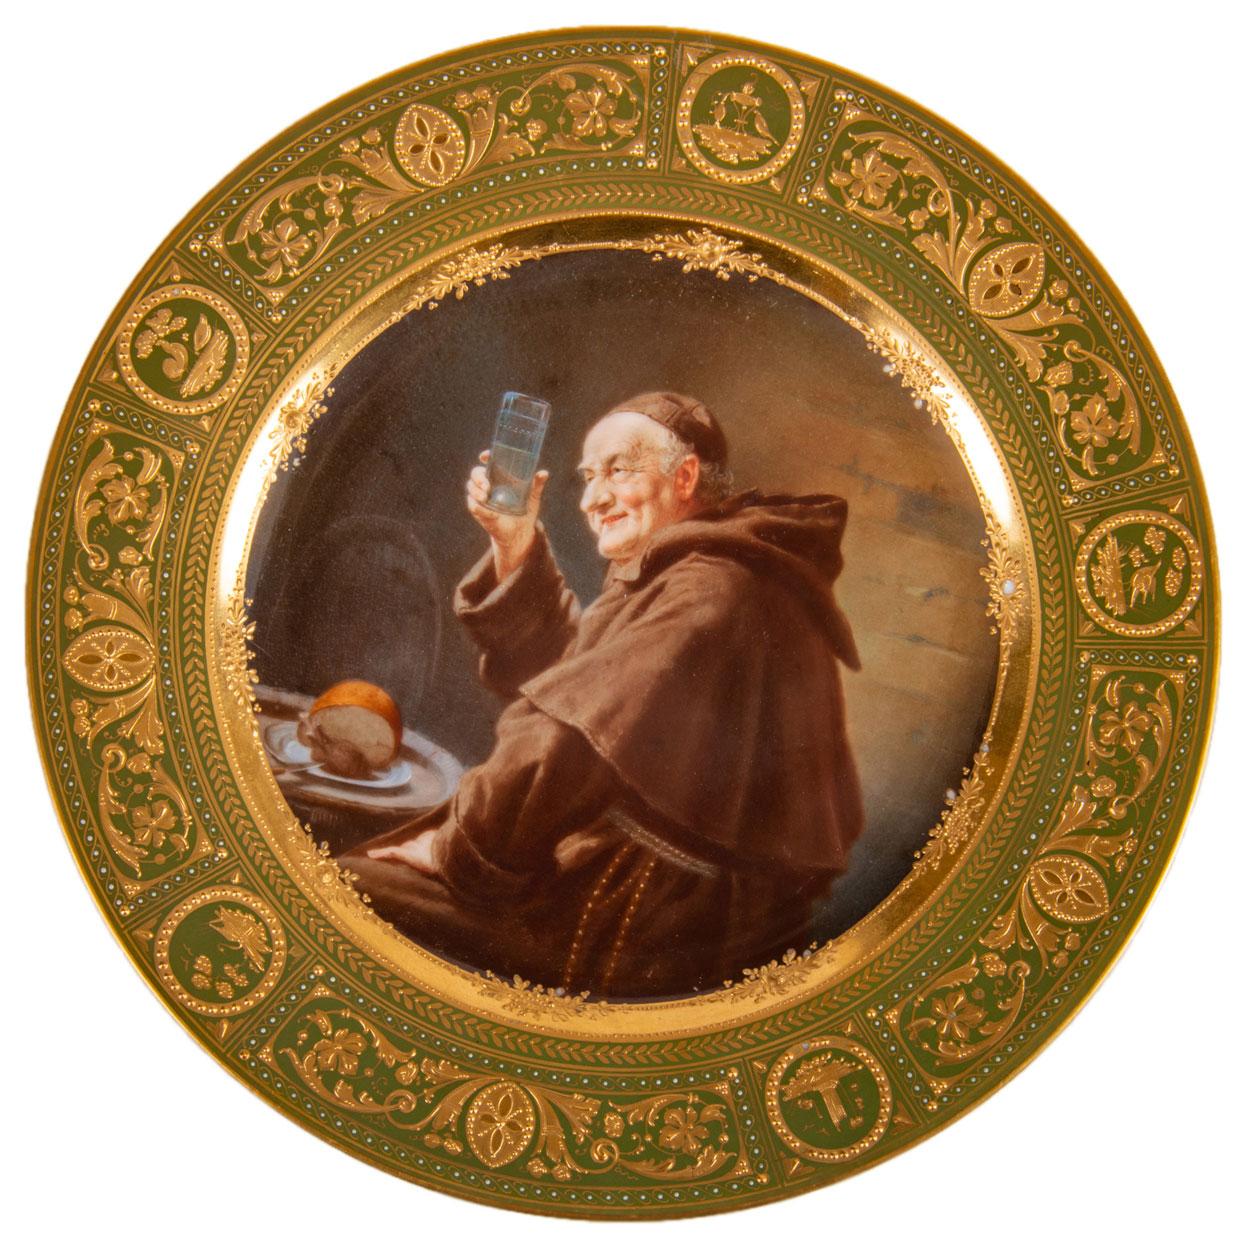 Two fine quality late 19th century Vienna porcelain cabinet plates, depicting a Monk and a brewer. Each with wonderful classical scrolling motif and foliate decoration to the boarders, one plate depicting a brewers with a barrel under his arm the